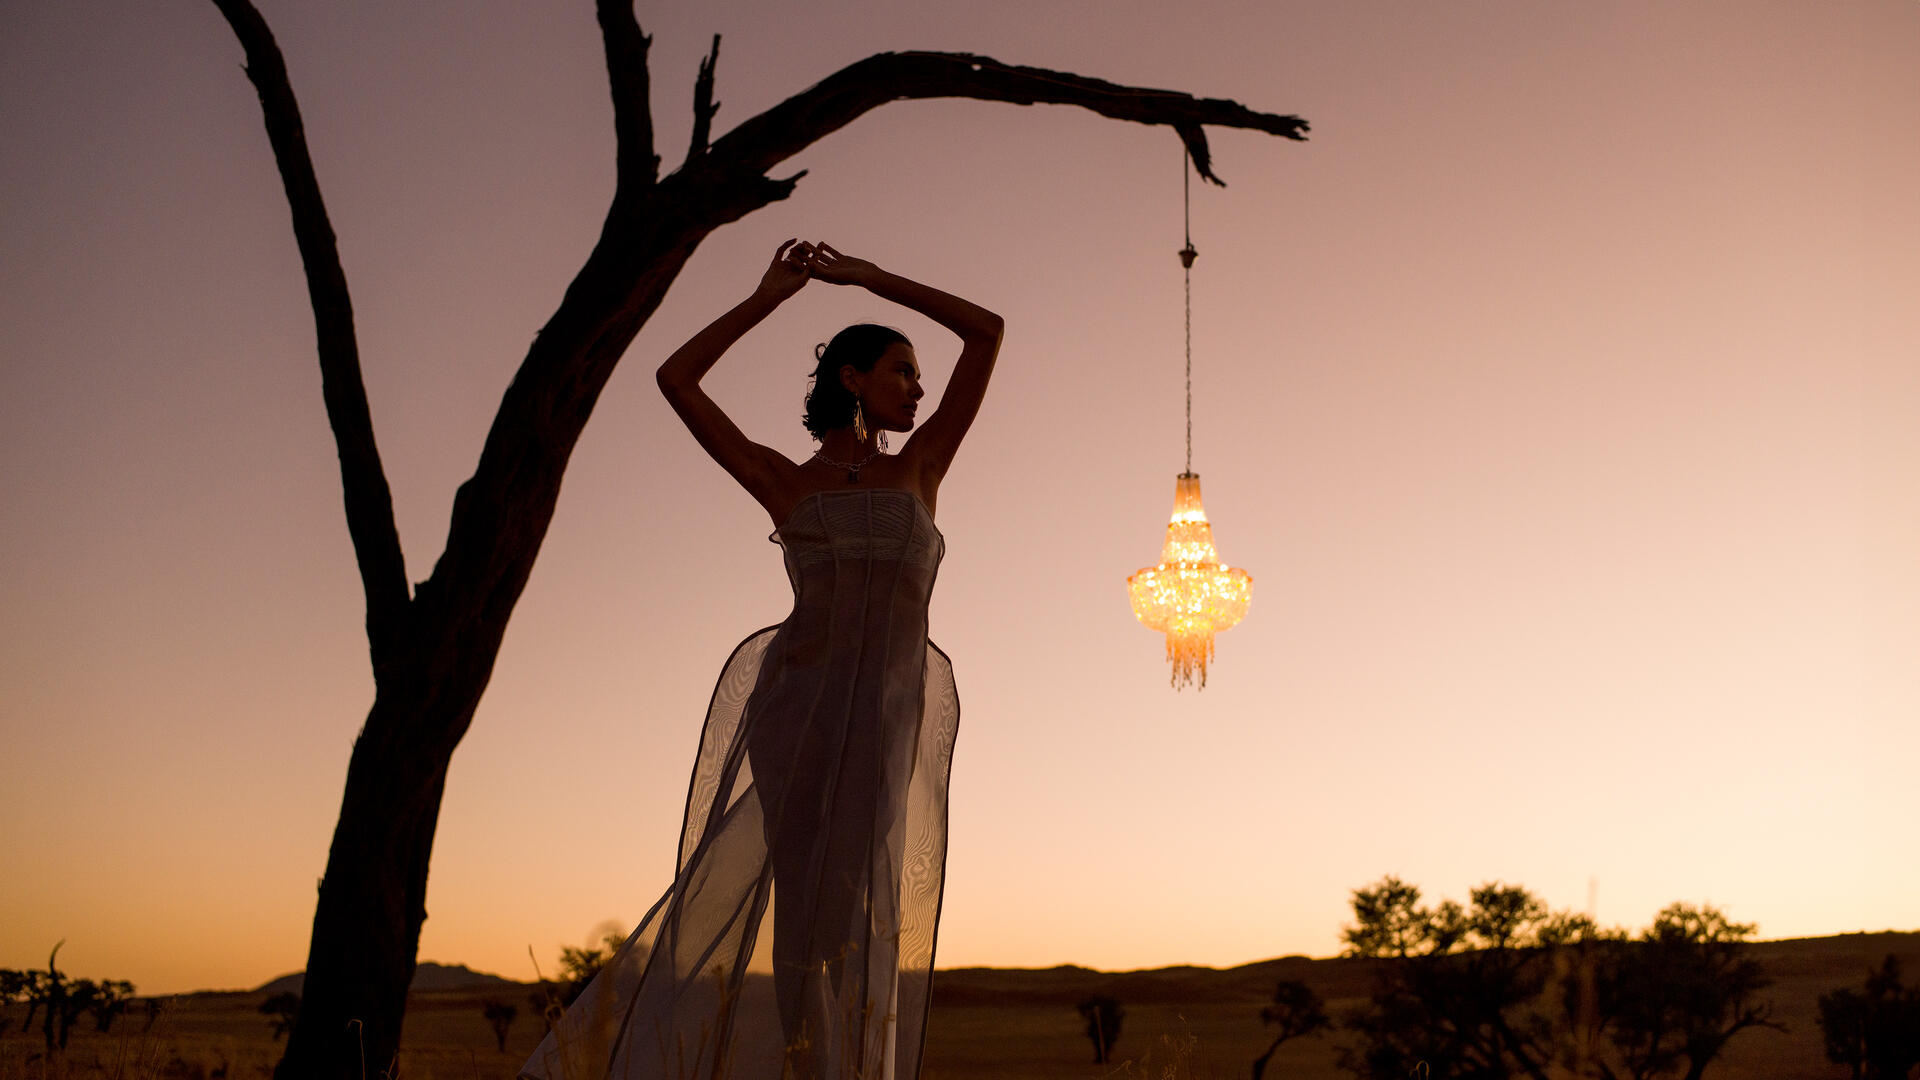 Image shot by Pat Domingo with the Leica SL3 showing woman in desert